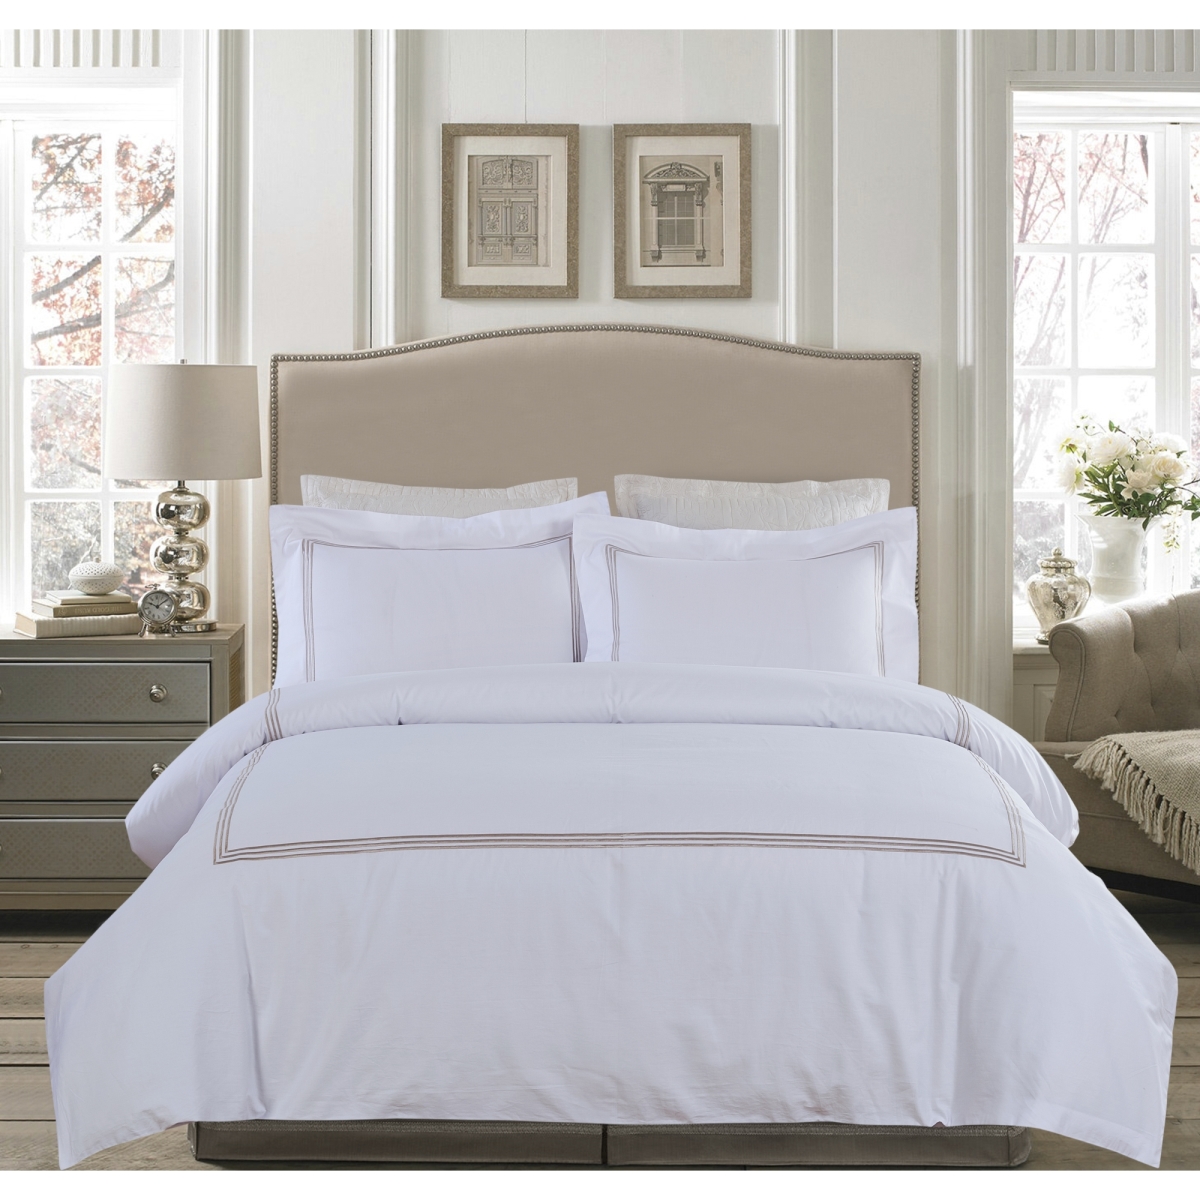 Whtx606-tnk Tan Line Embroidery On White 300 Thread Count Cotton Sateen Duvet Set - King Size - 3 Piece